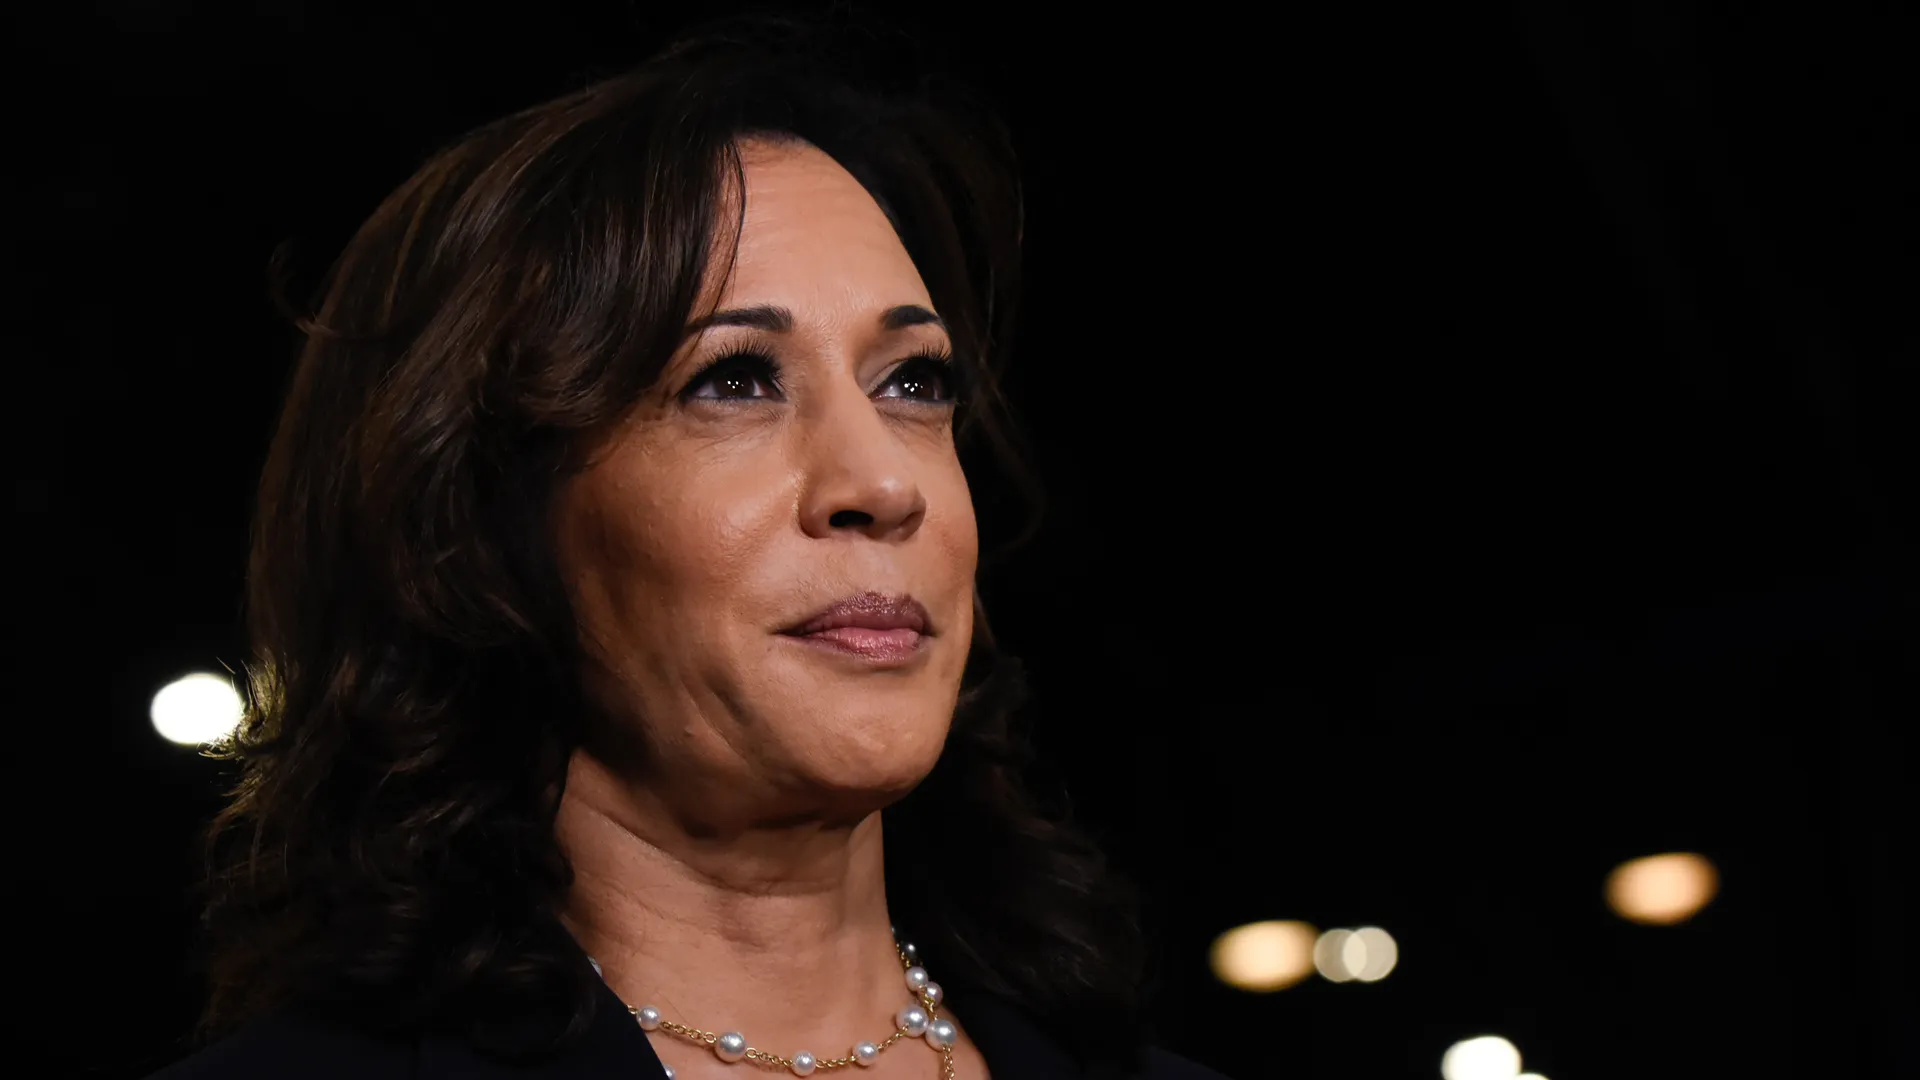 Mandatory Credit: Photo by Michele Eve Sandberg/Shutterstock (10742432a)On August 11, 2020 former VP Joe Biden named Kamala Harris as his running mate, making the California senator the first Black and South Asian American woman to run on a major political party's presidential ticket.